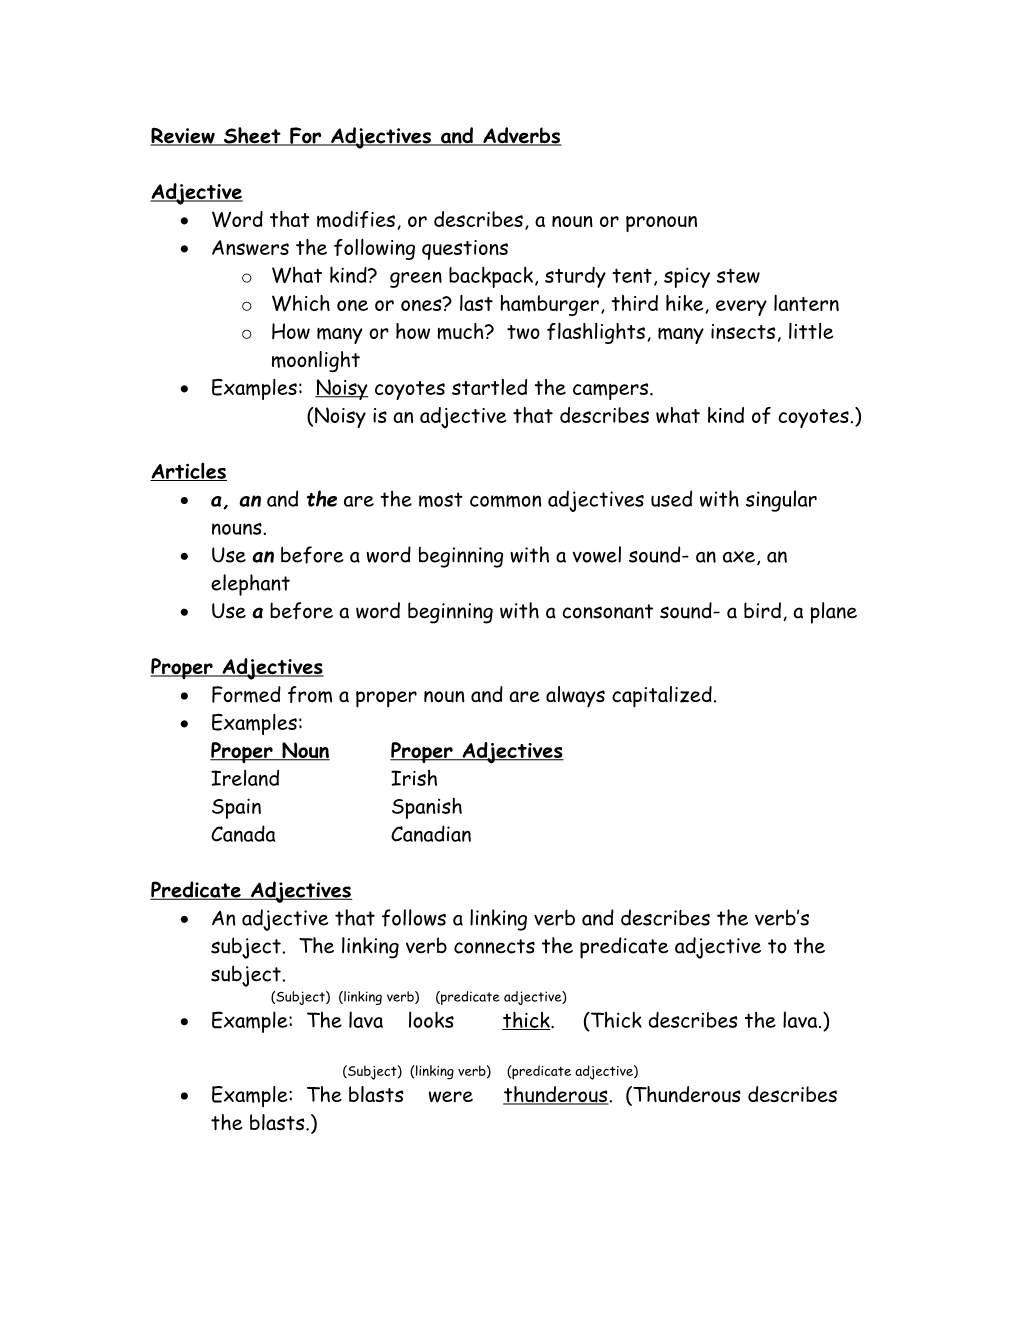 Review Sheet for Adjectives and Adverbs